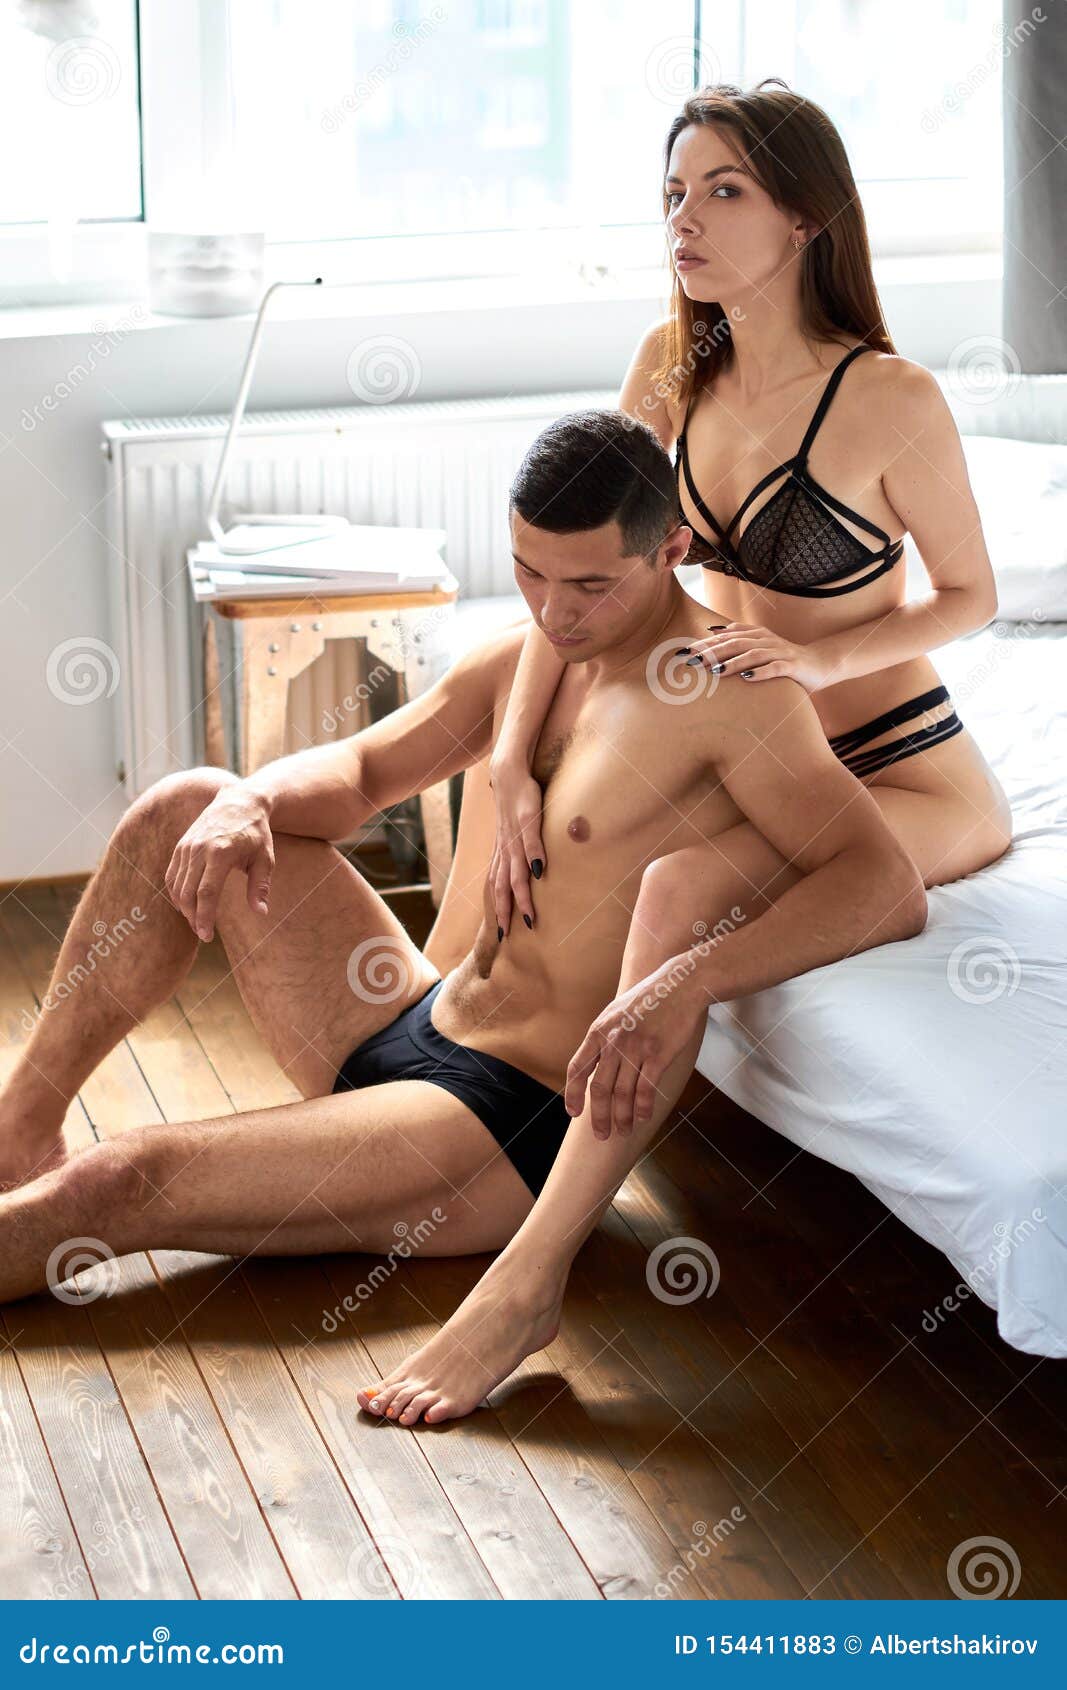 Woman in Stylish Lingerie Trying To Support Her Husband As he Has Problems  Stock Image - Image of beauty, indoors: 154411883